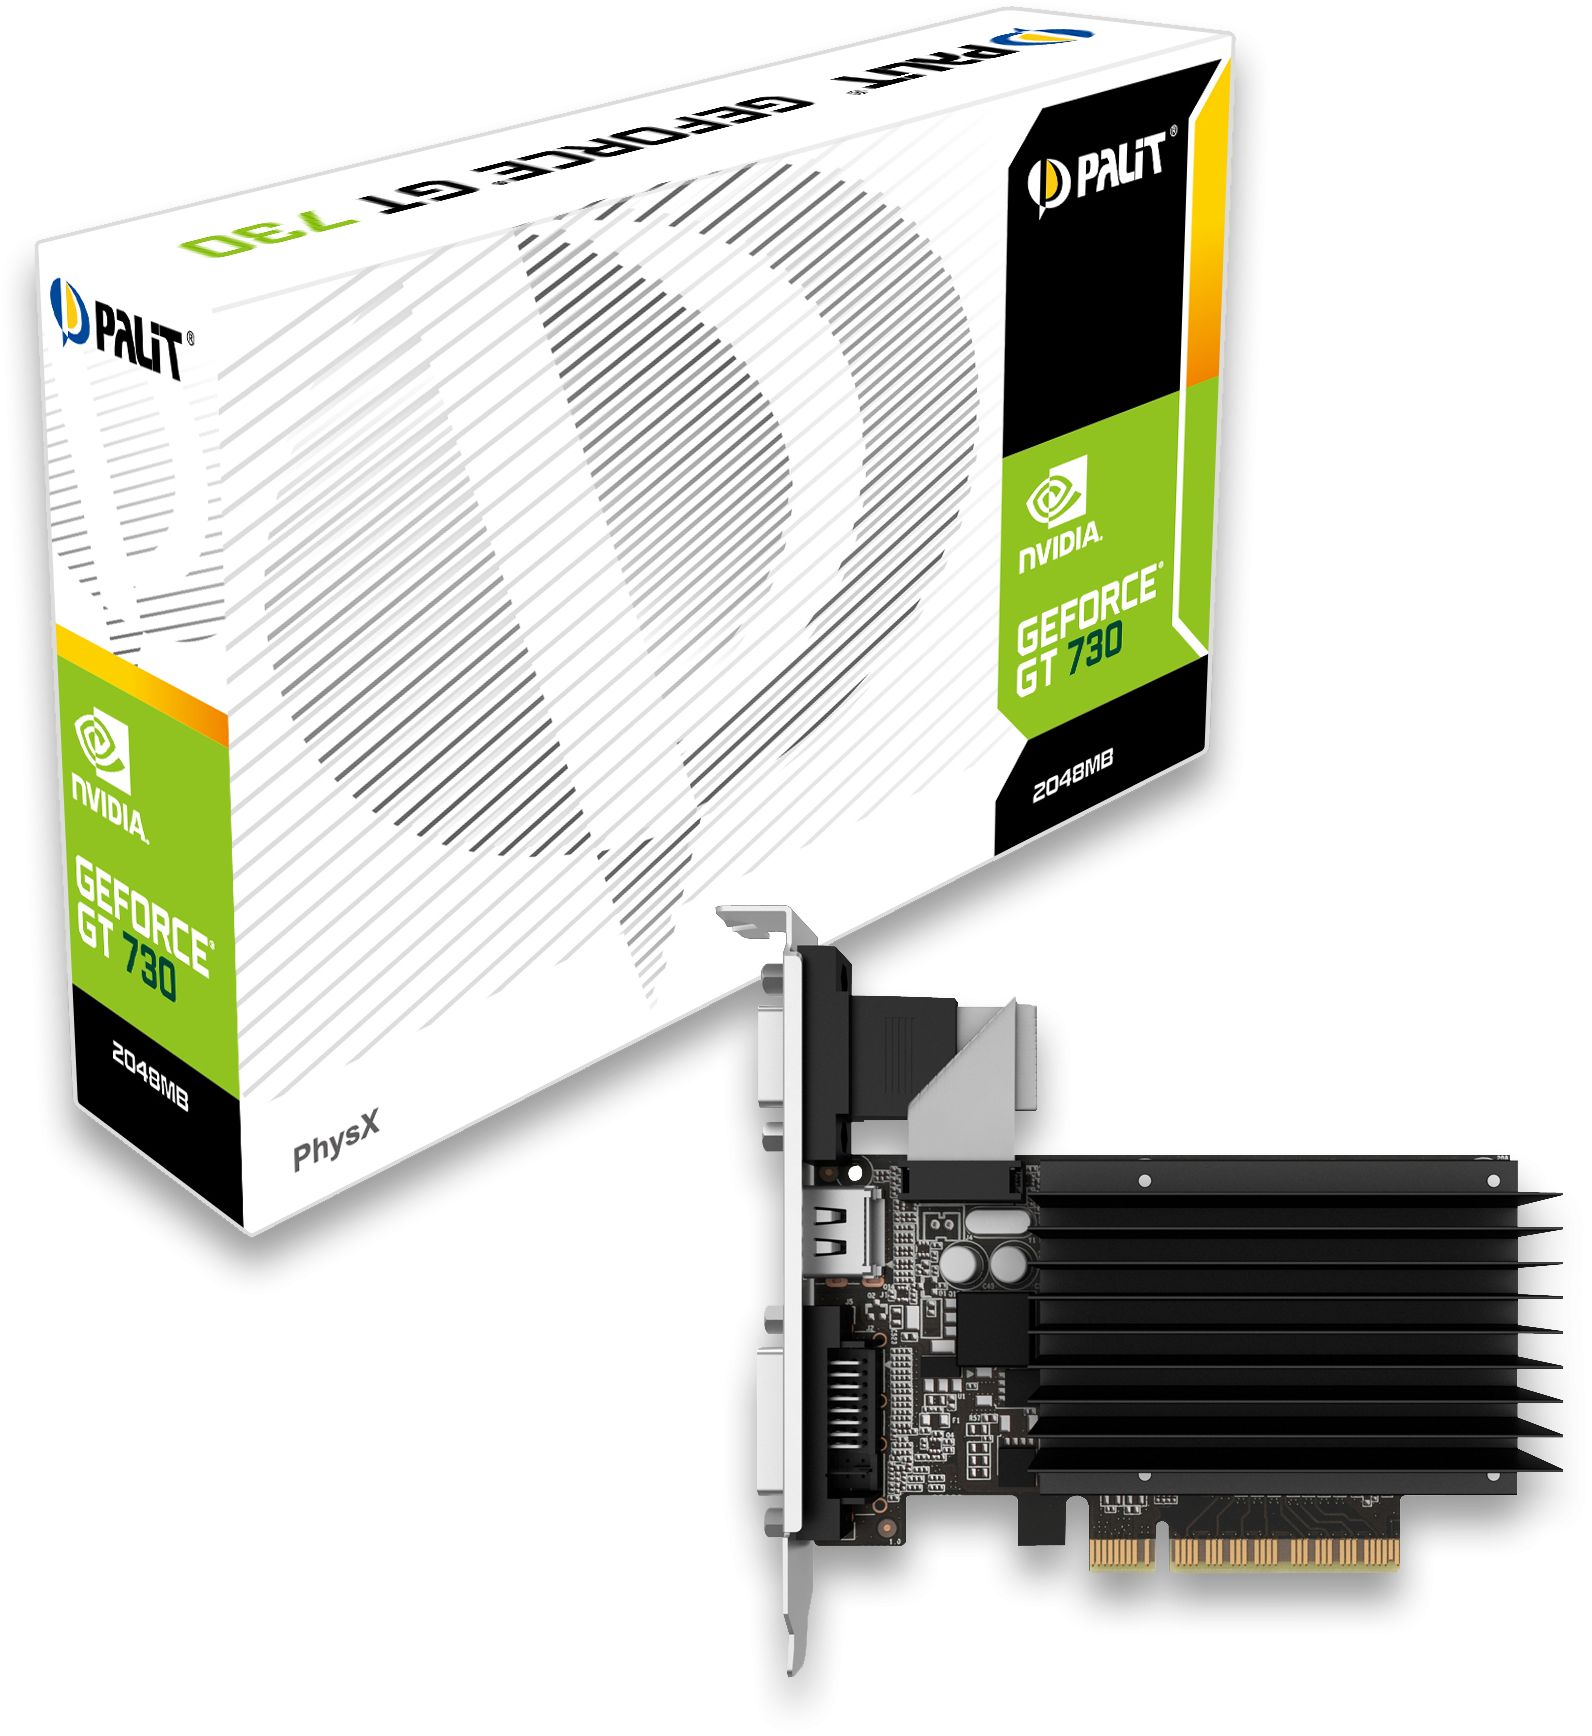 Geforce GT 730 2GB DDR3 Fanless Graphics Card